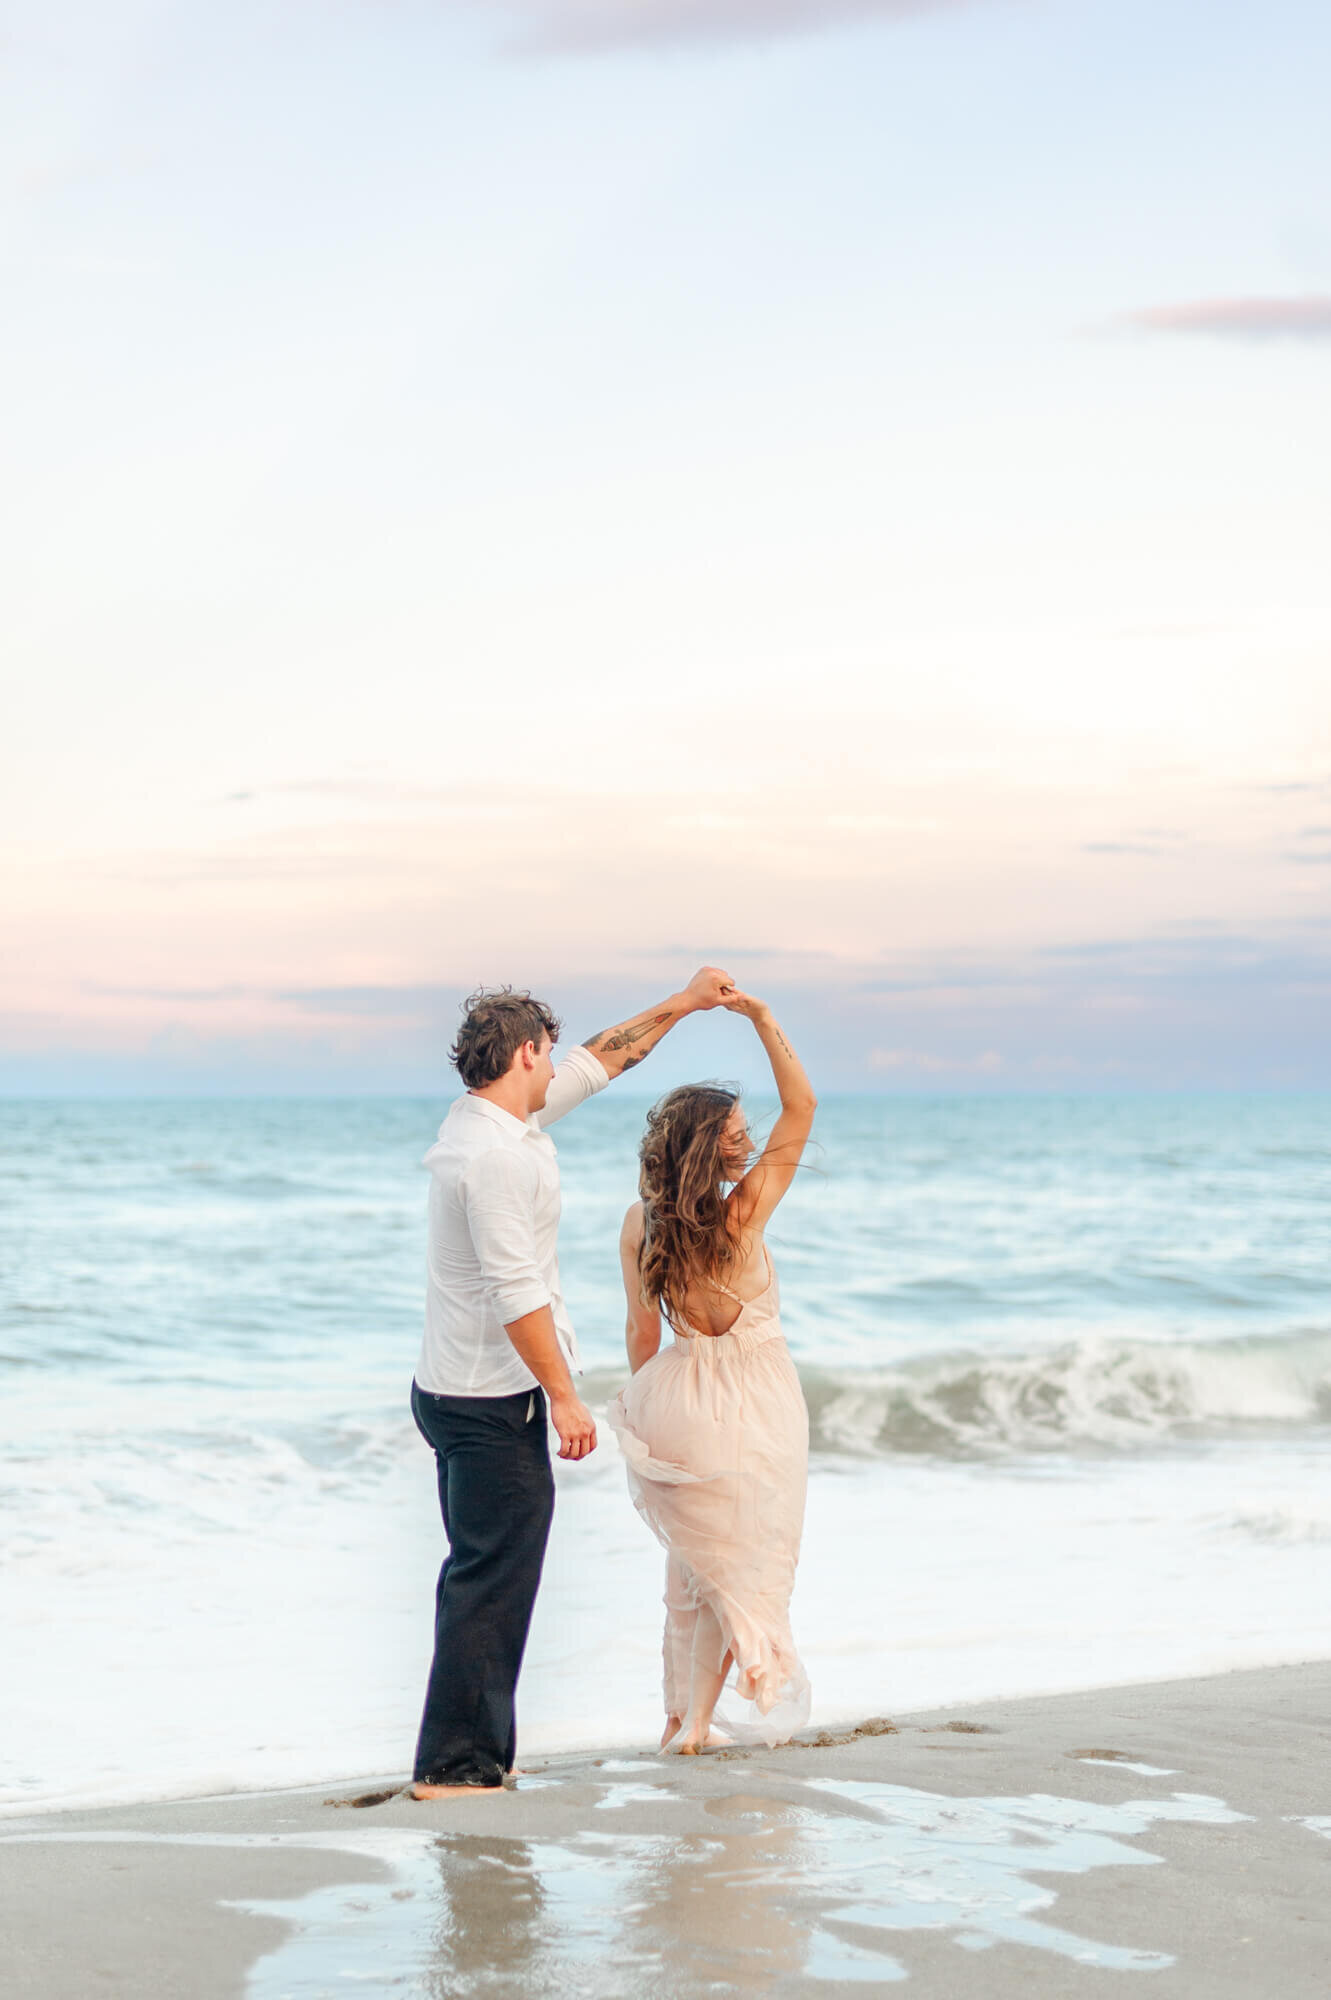 Couple visiting the beach for a picnic dance near the shoreline during their couples photography session